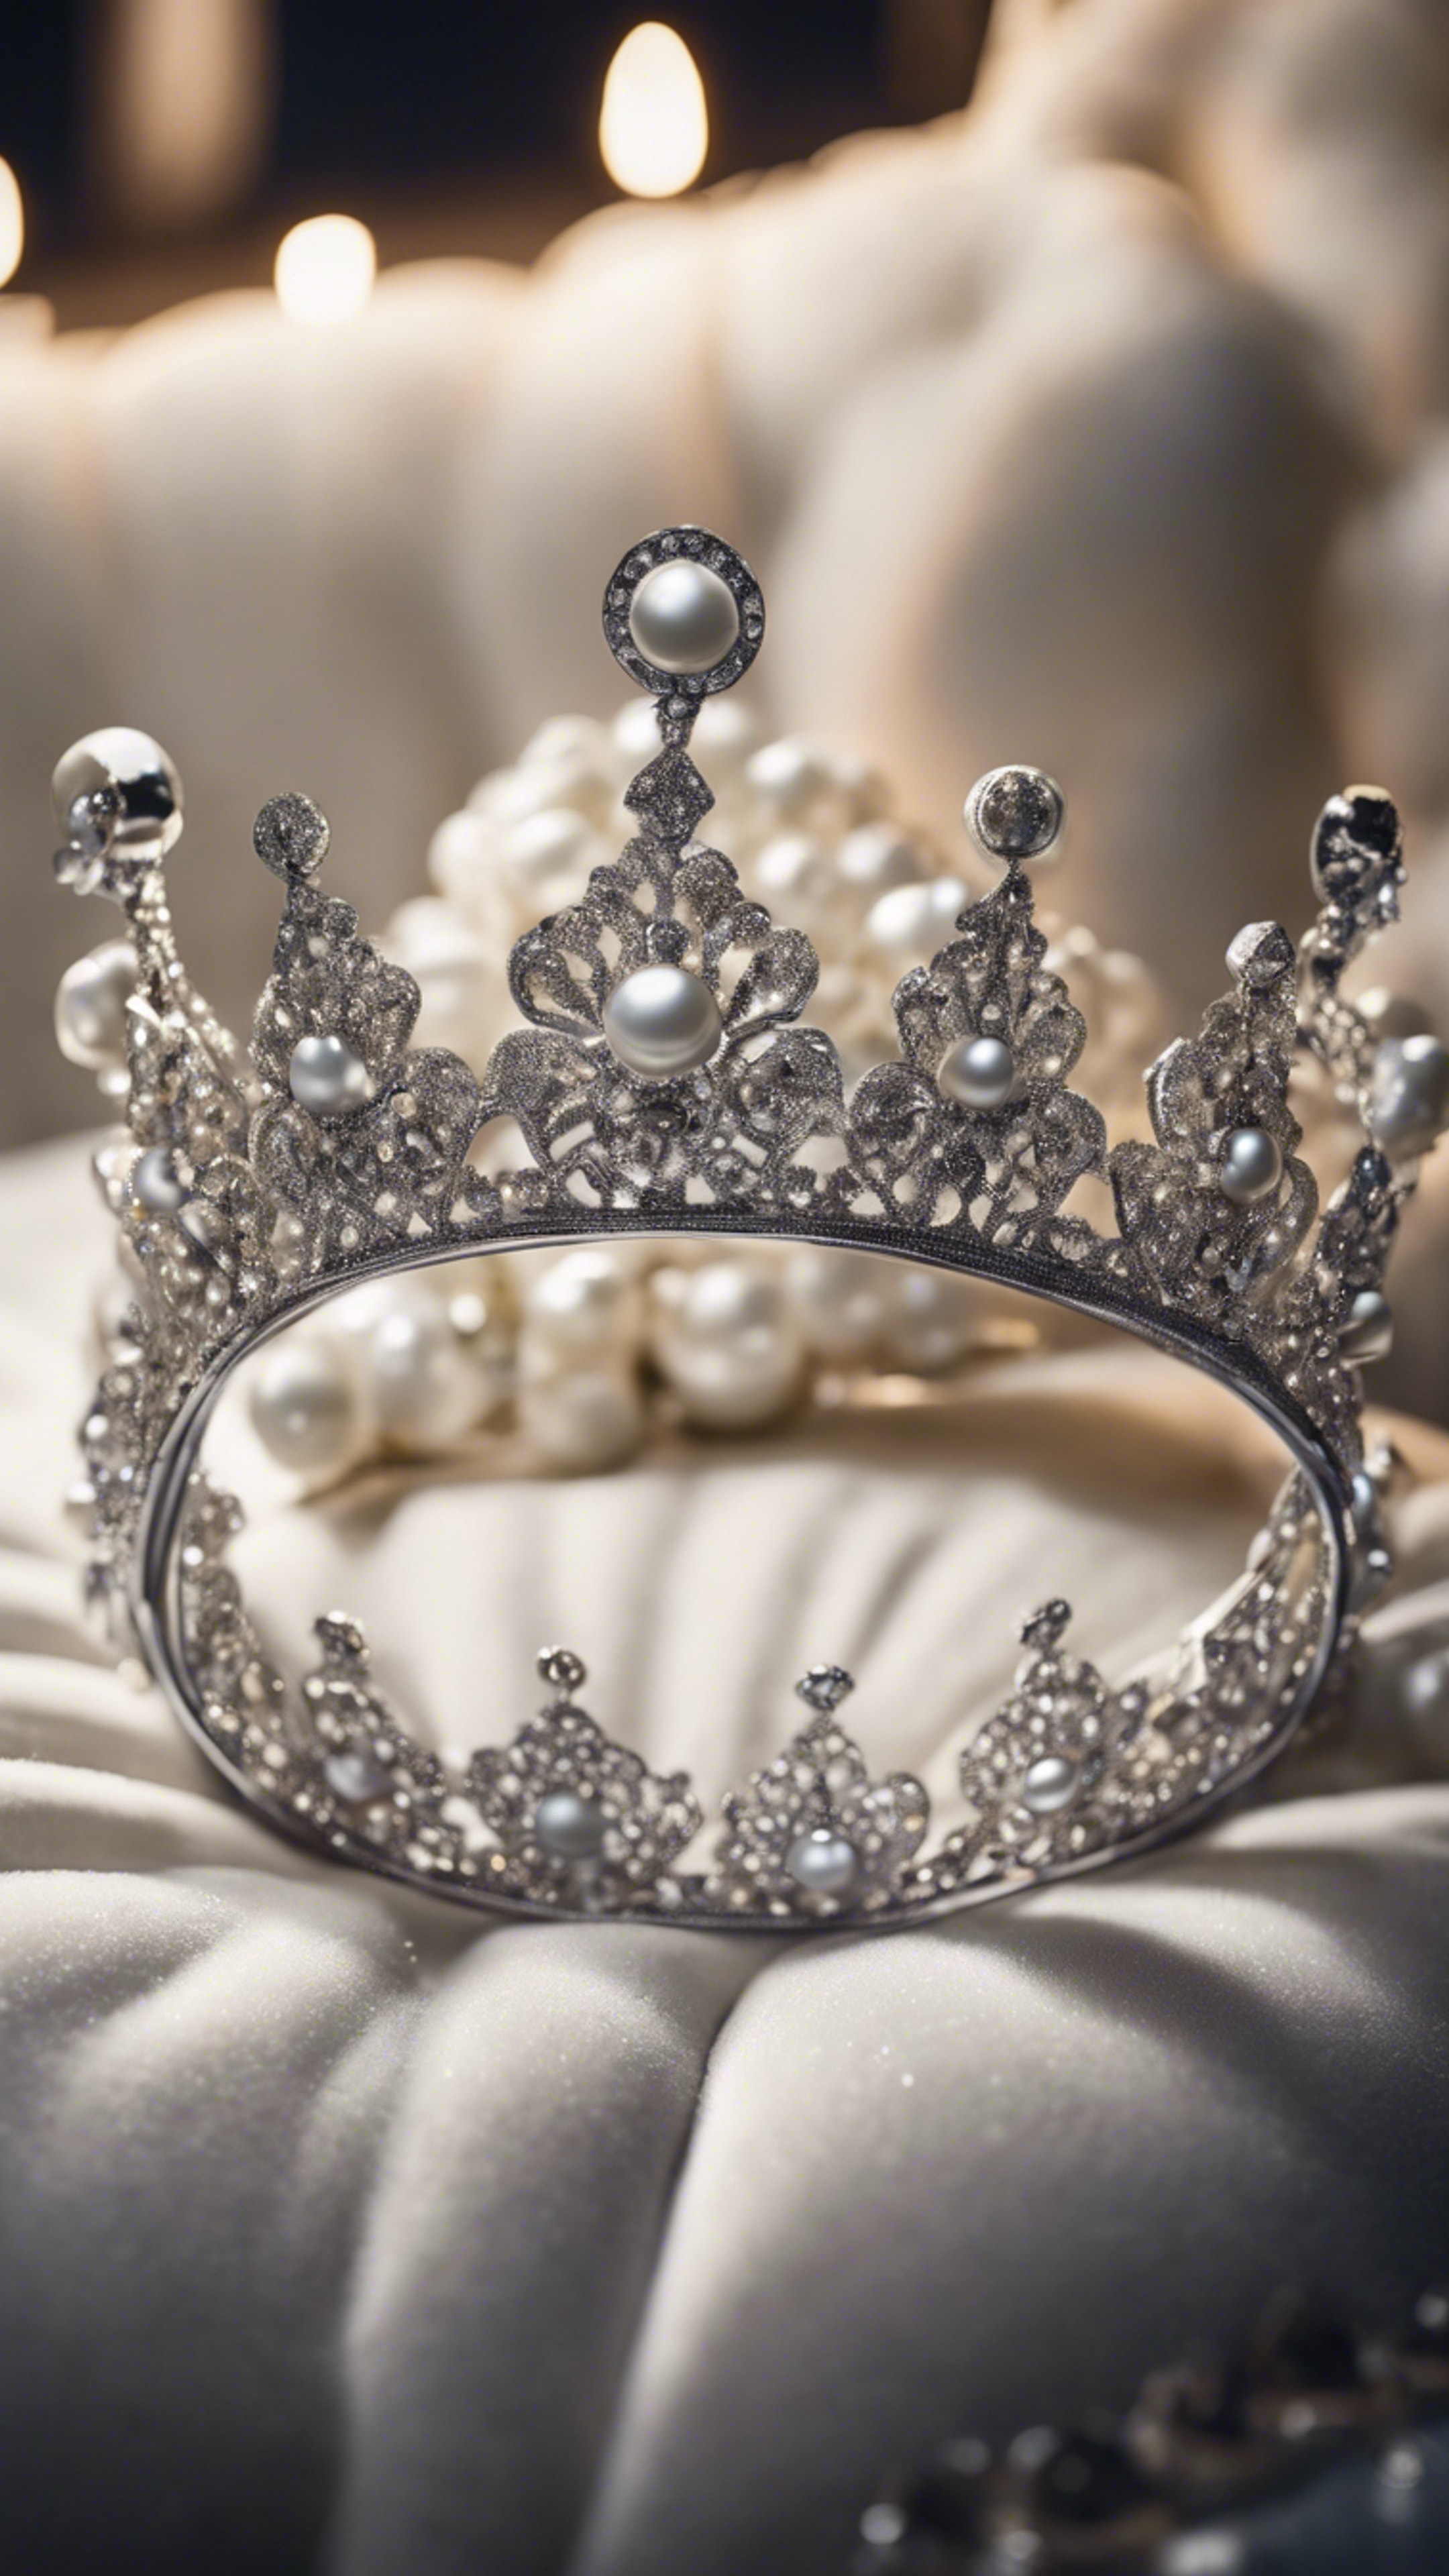 A classic silver crown embellished with pearls and diamonds lying on a white velvet cushion at night.